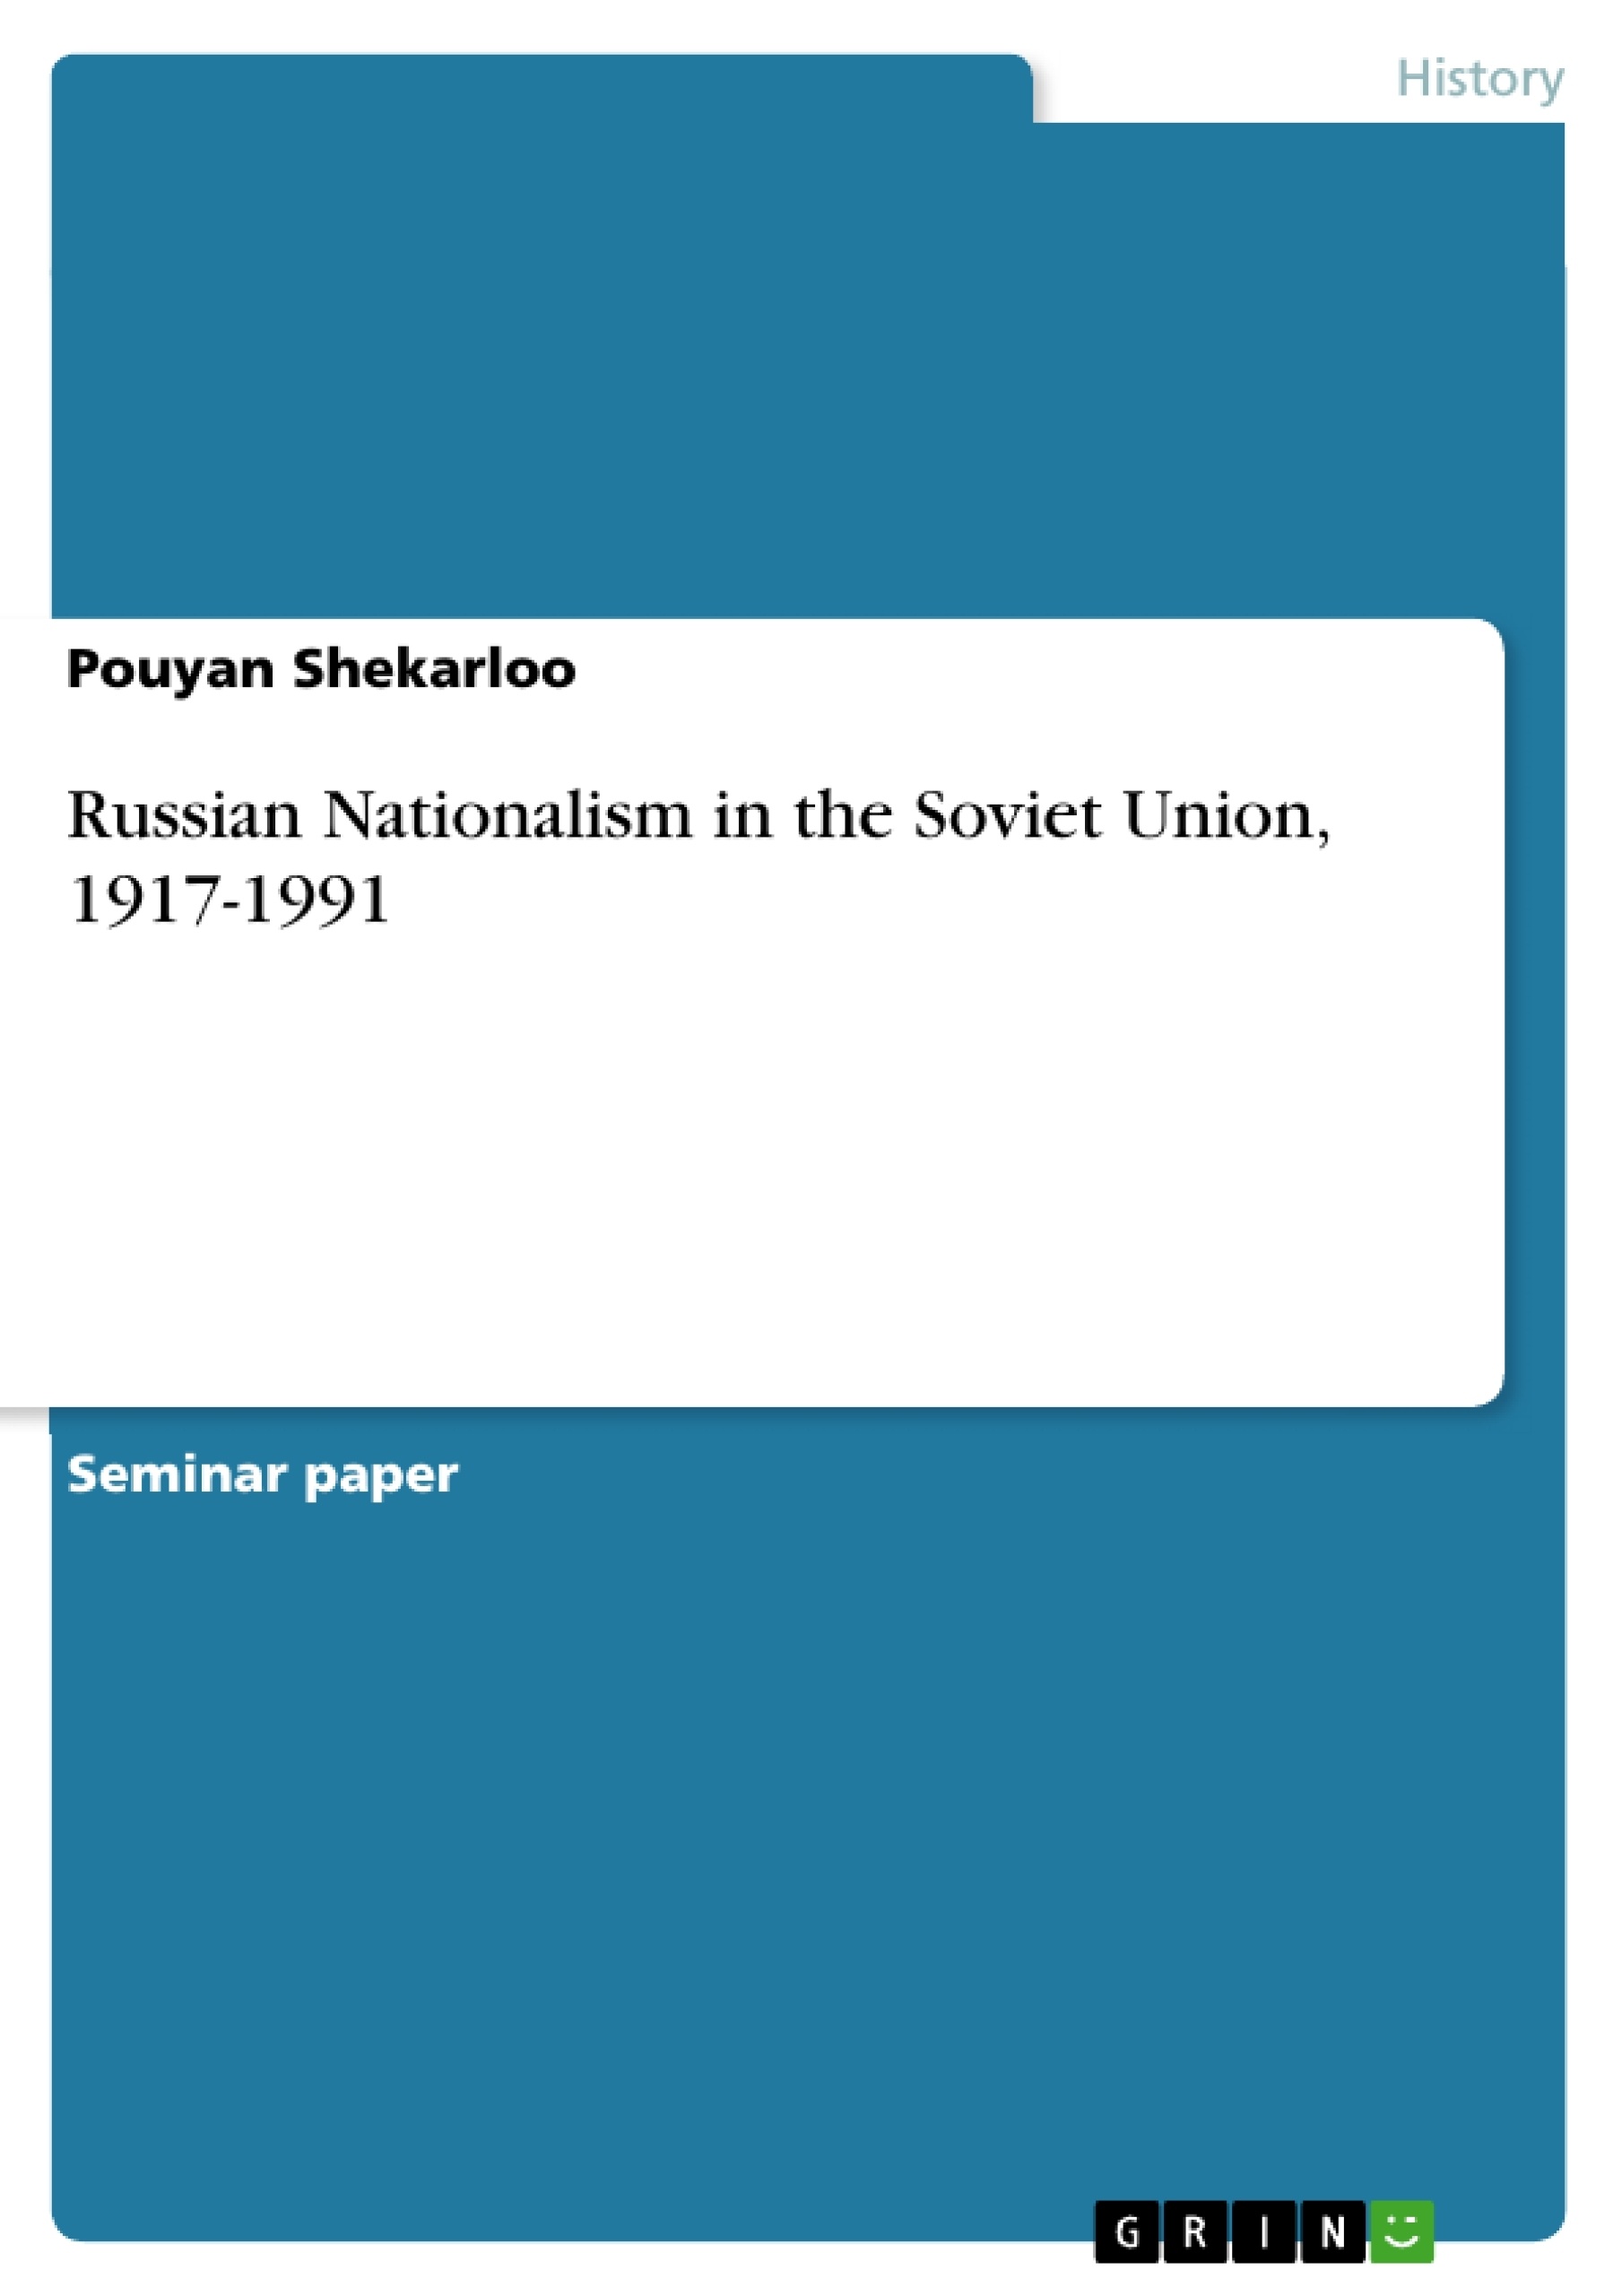 Title: Russian Nationalism in the Soviet Union, 1917-1991